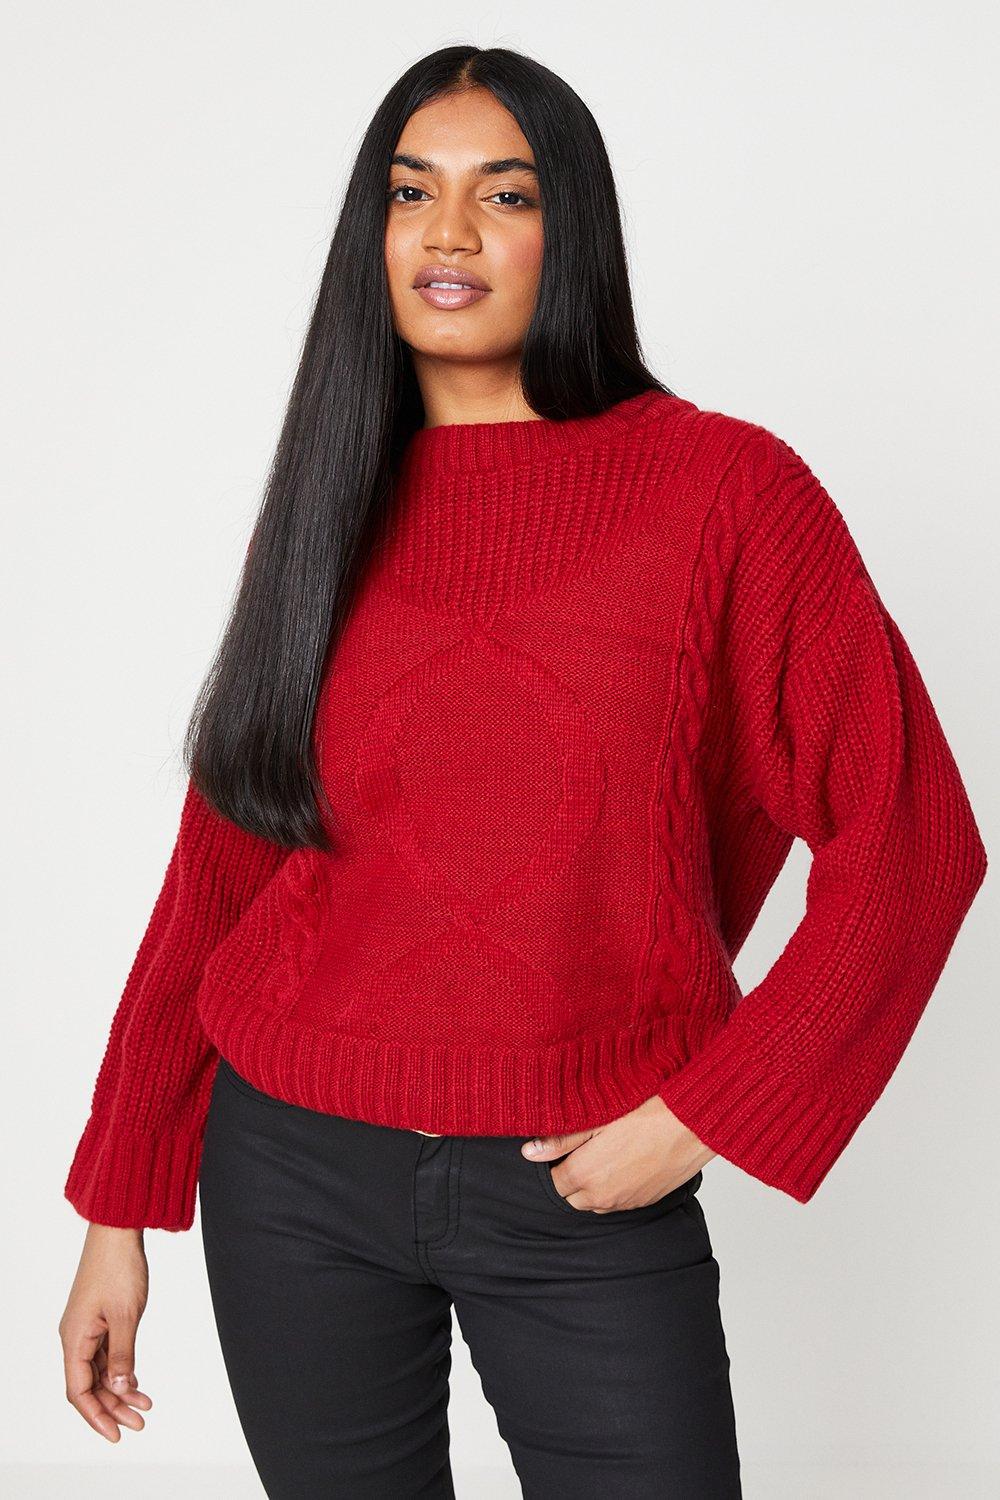 Women’s Petite Wide Sleeve Cable Fluffy Knit Jumper - red - M